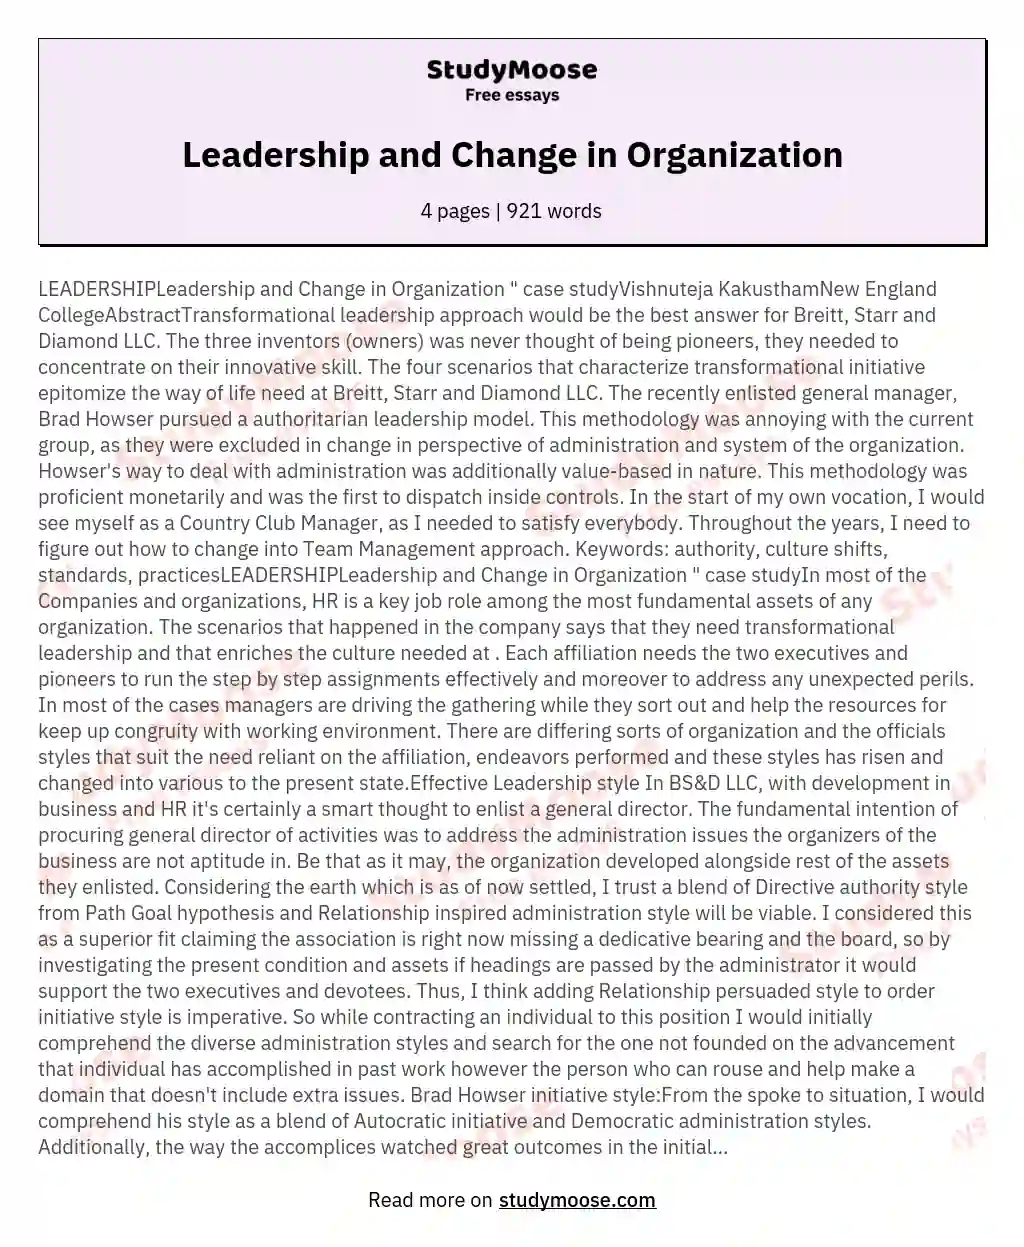 Leadership and Change in Organization essay